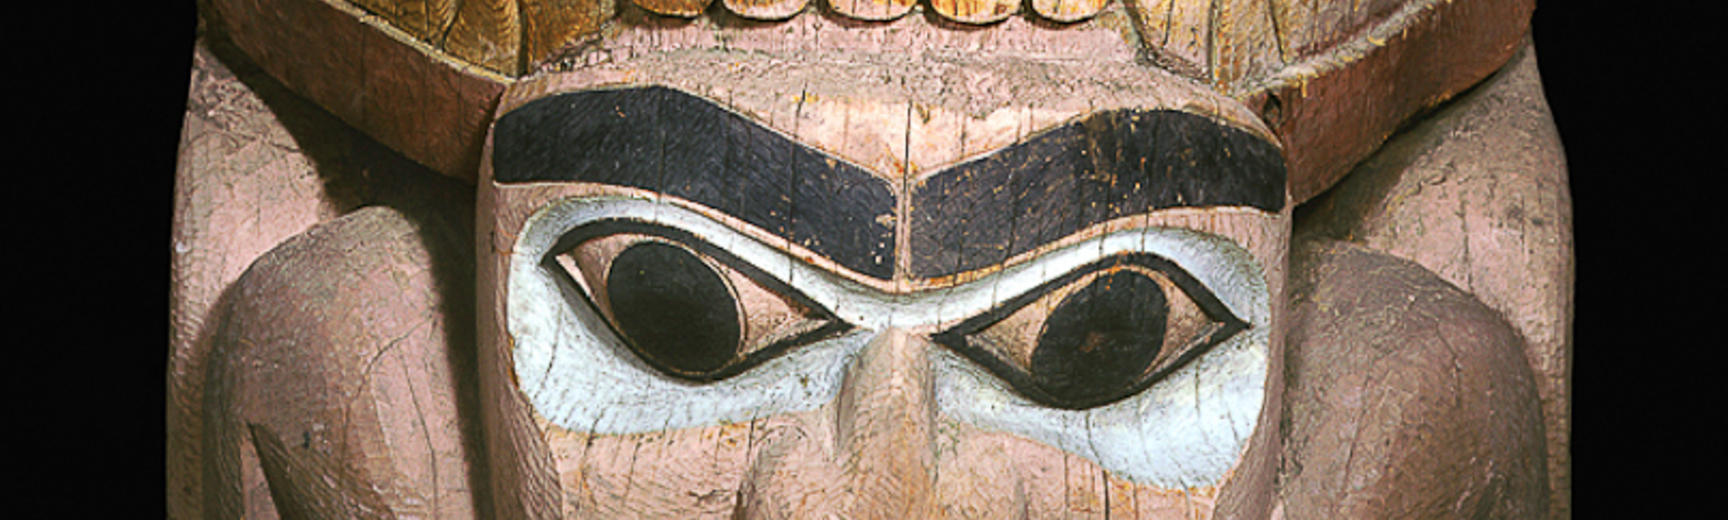 Section of totem pole showing a stylised bear’s face above a man’s face.